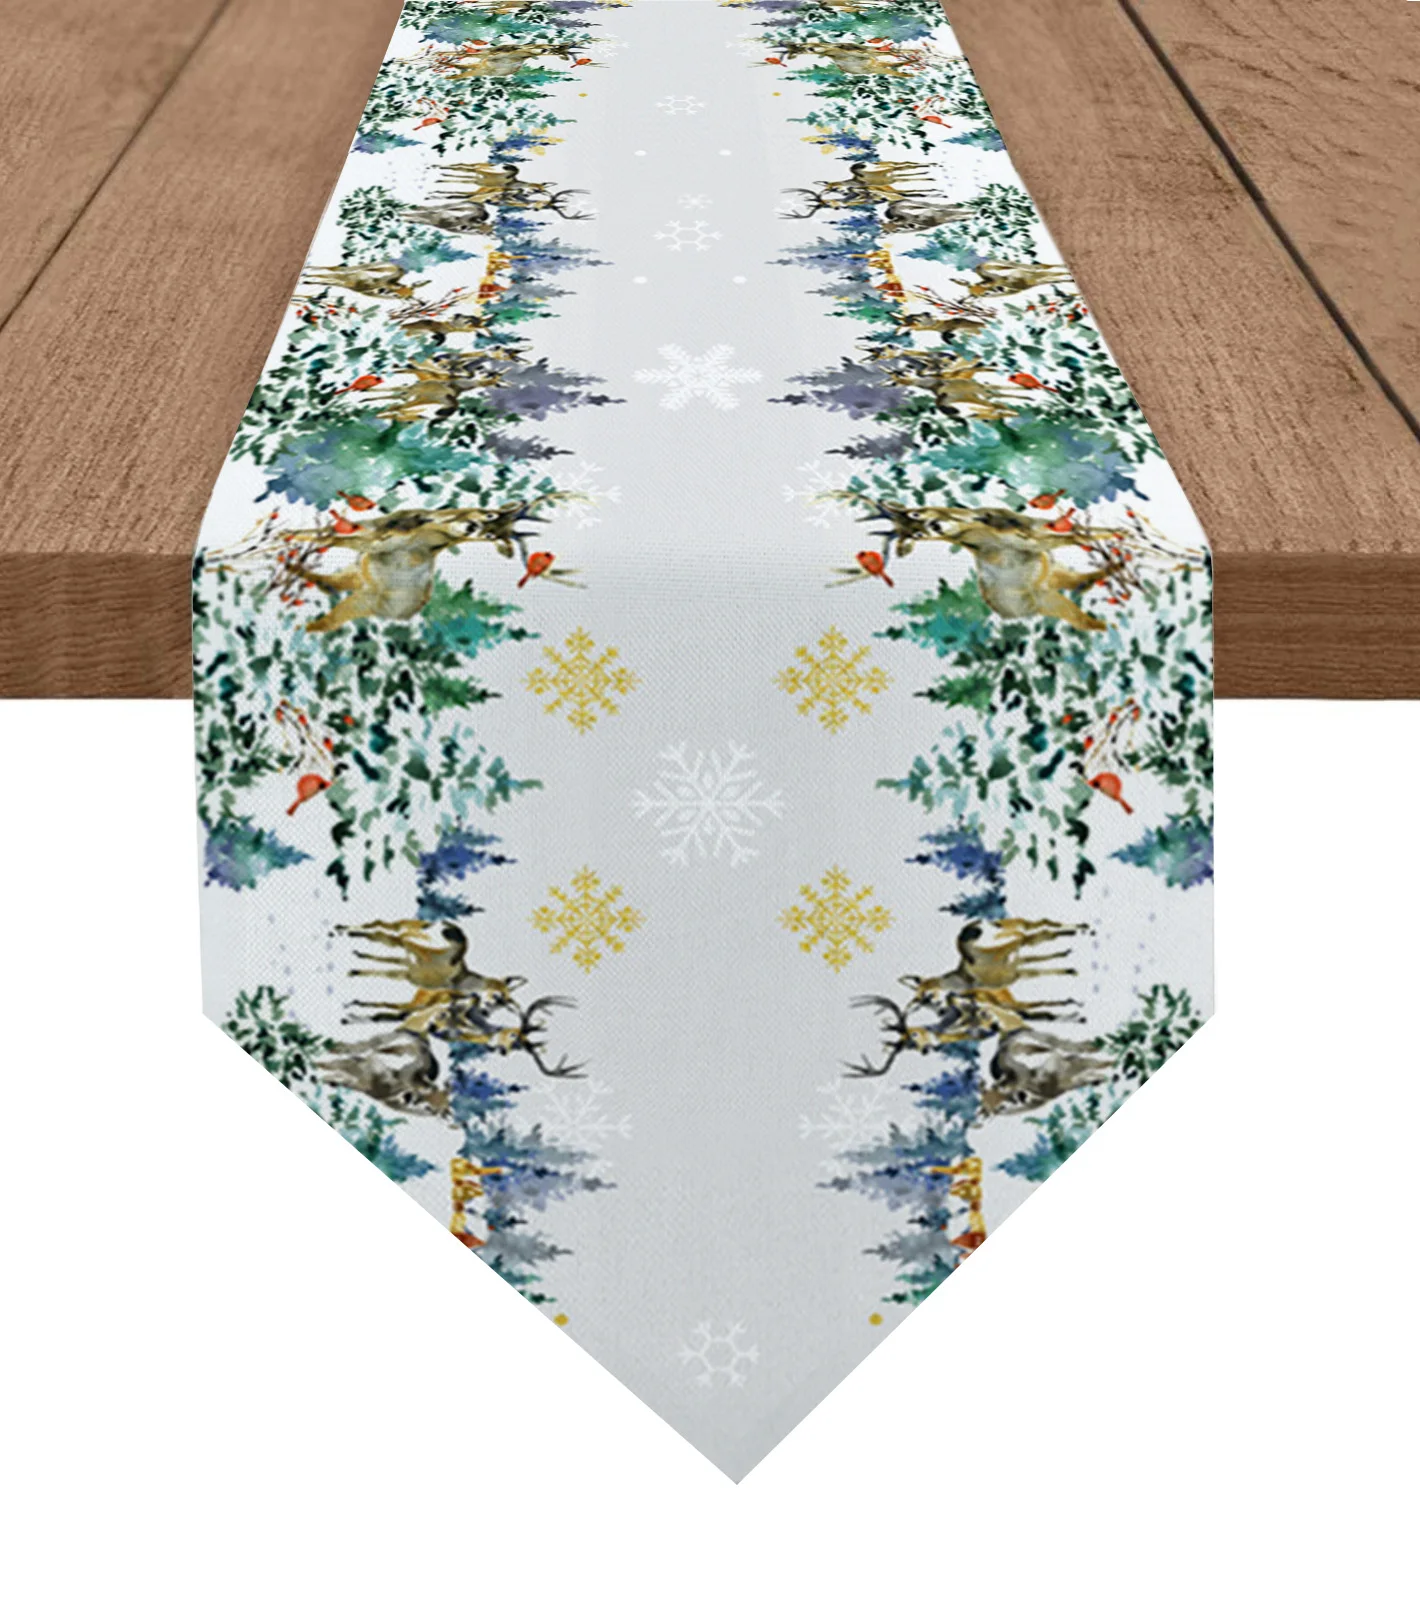 

Winter Christmas Pine Tree Elk Snowflakes Table Runner Wedding Holiday Party Decor Tablecloth Summer Kitchen Dining Table Runner